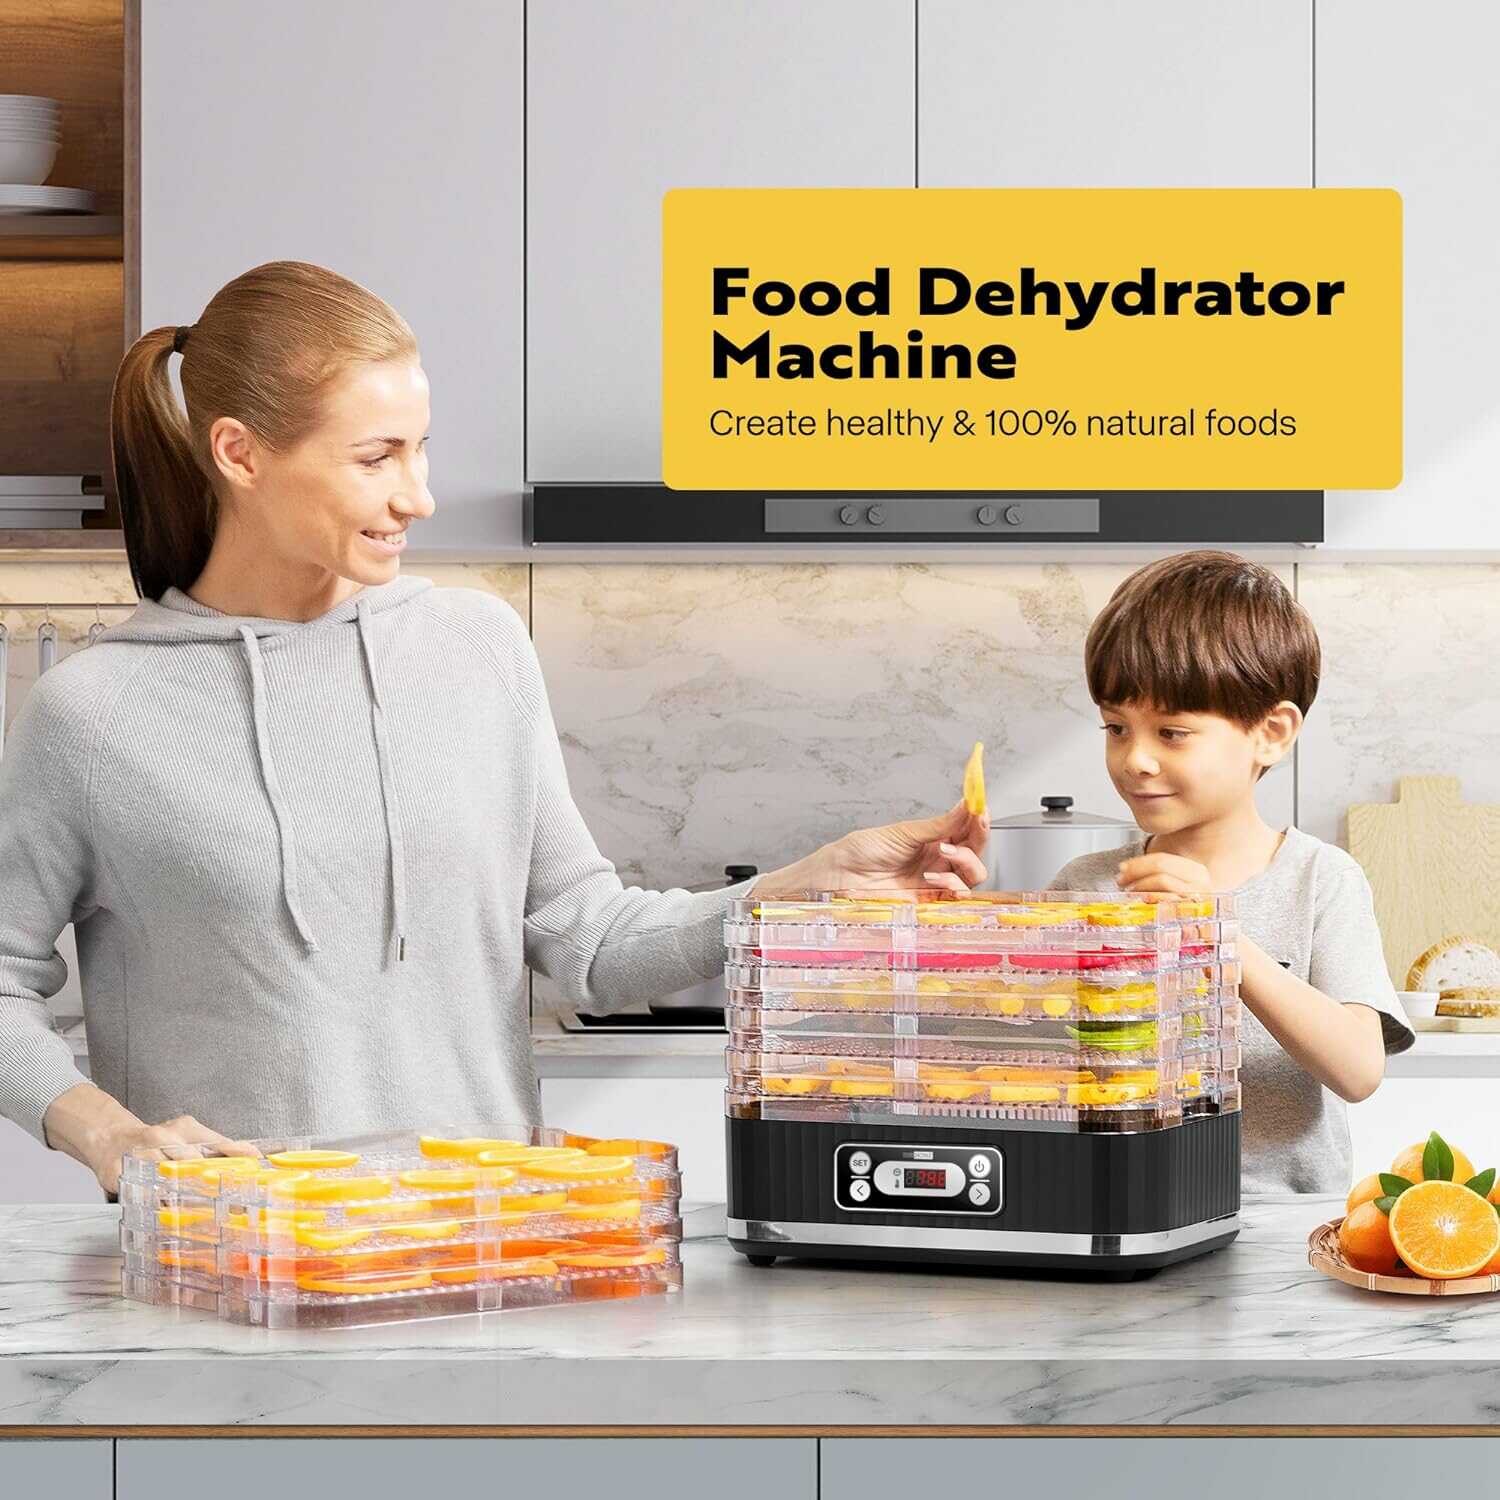 VIVOHOME Herbal Butter Maker Machine Decarboxylator